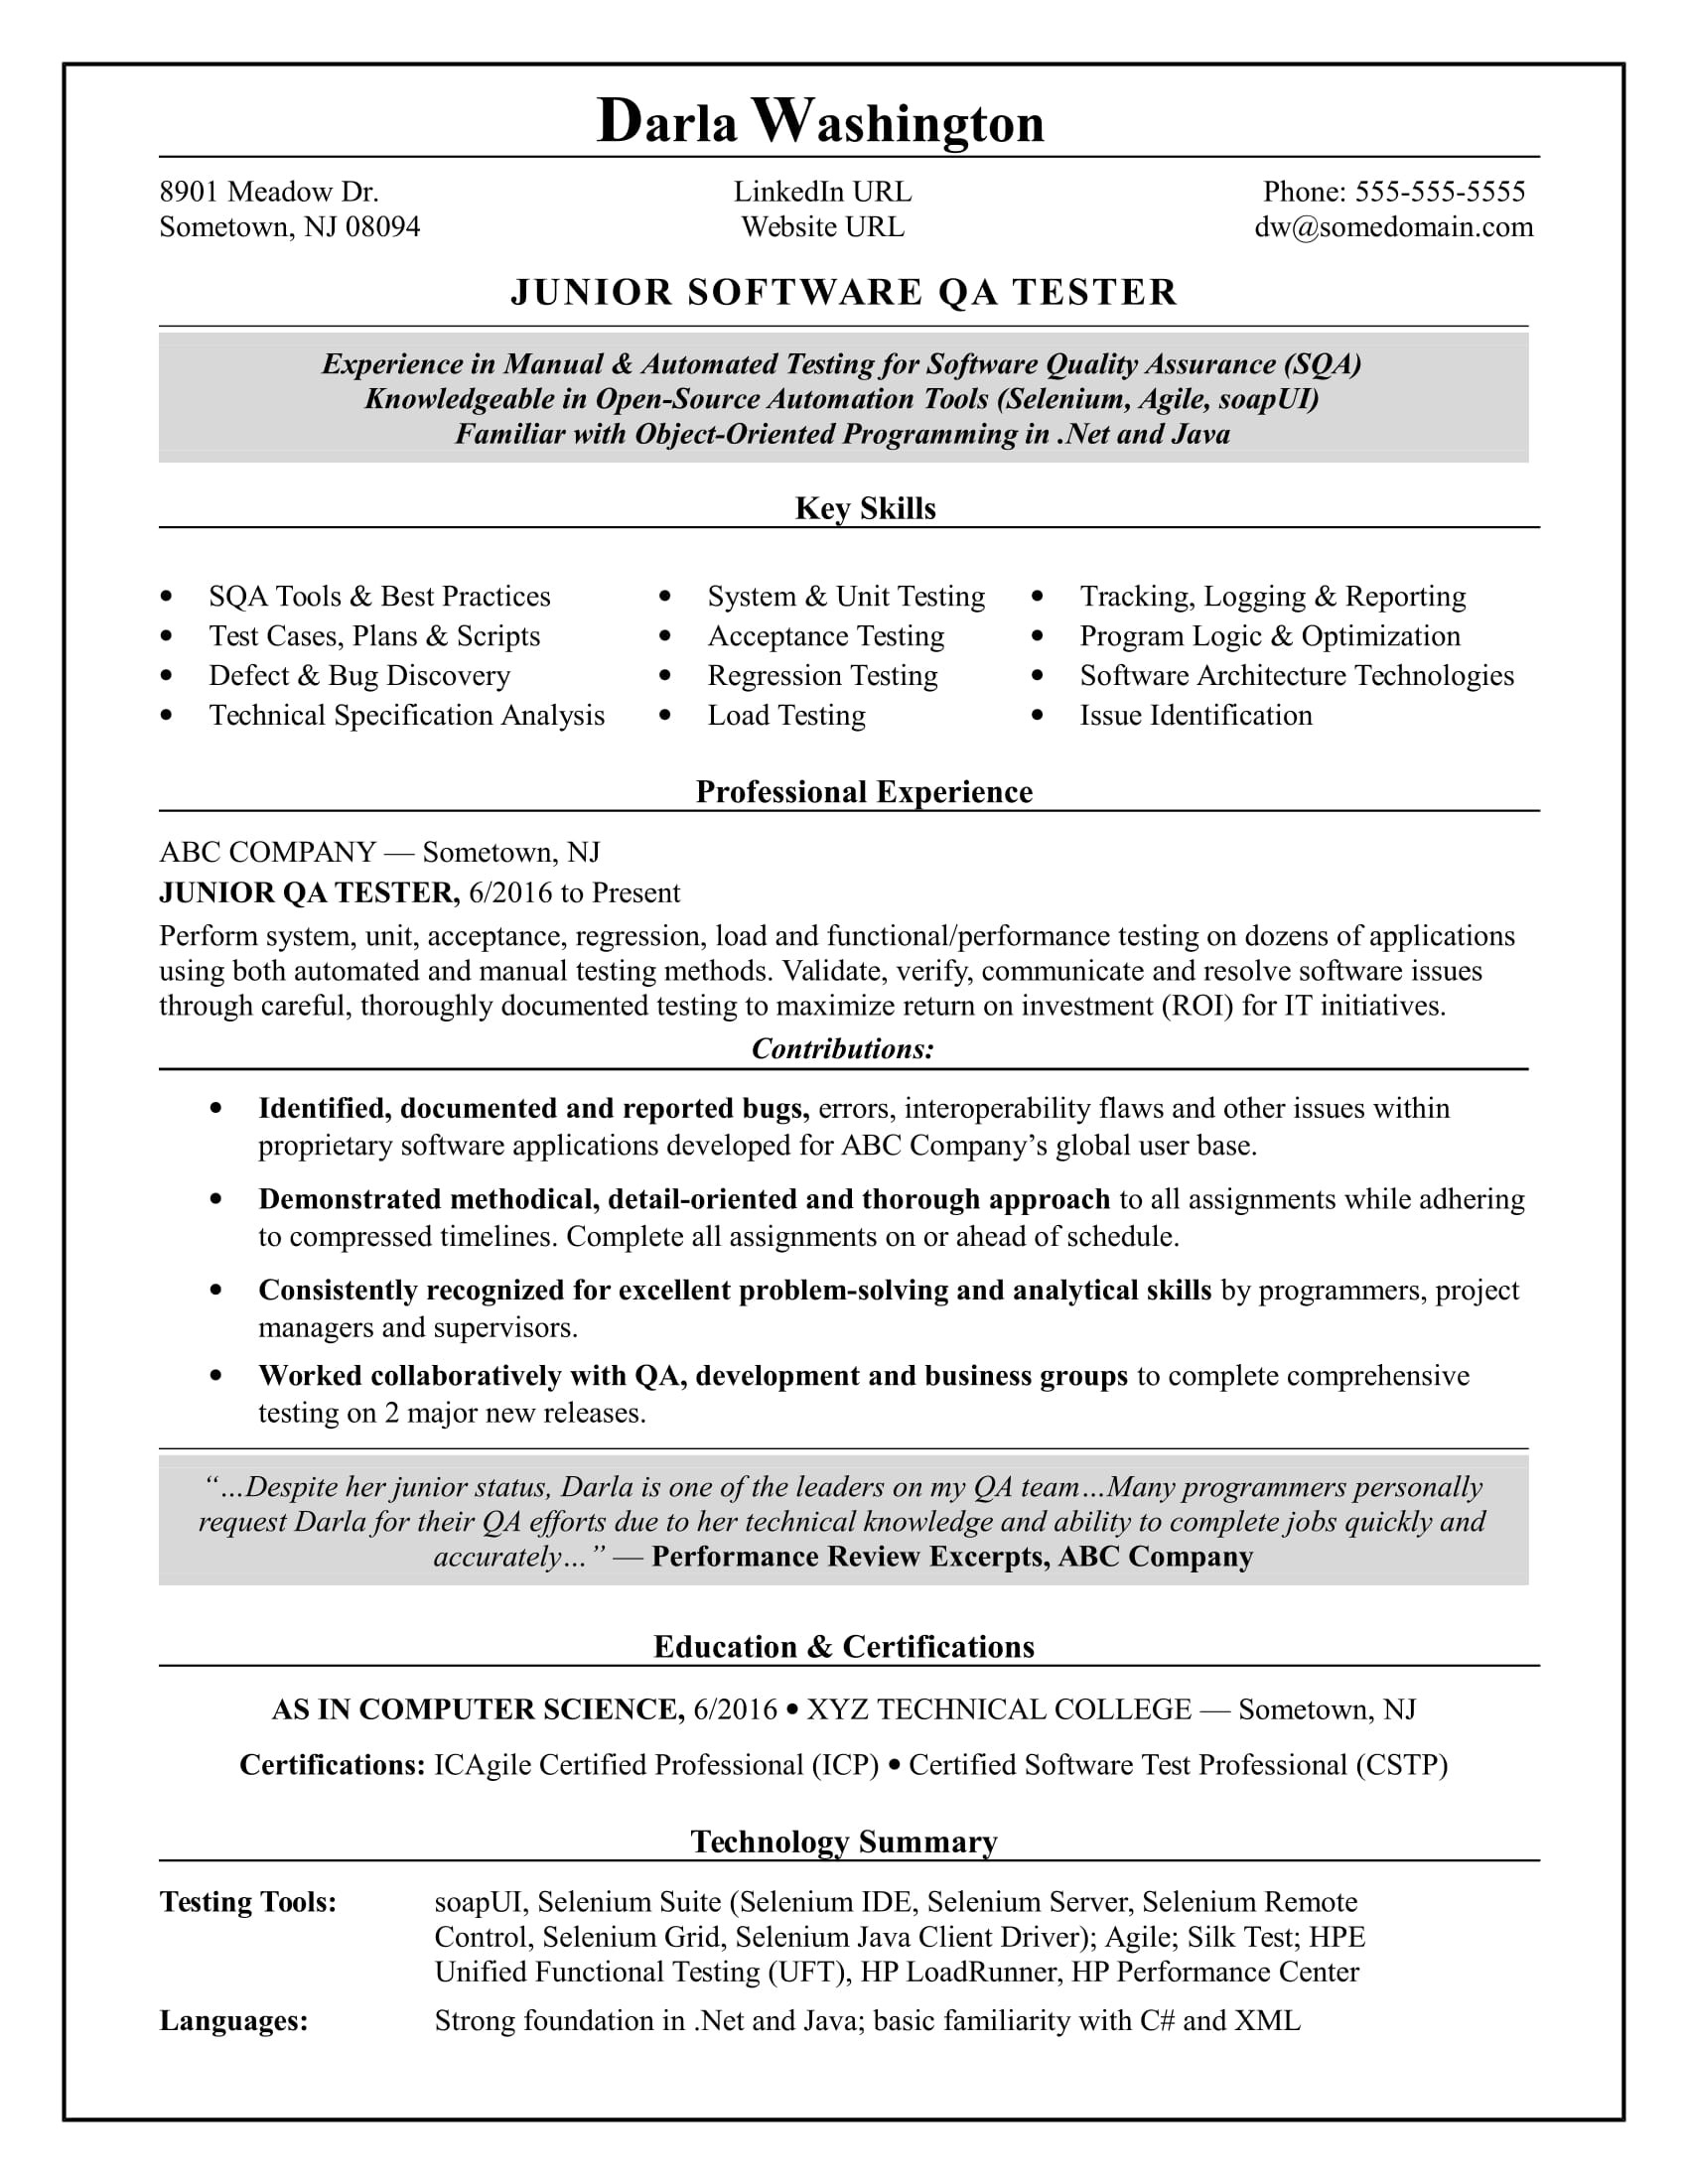 Software Testing Resume Samples for 6 Years Experience Entry-level software Tester Resume Monster.com